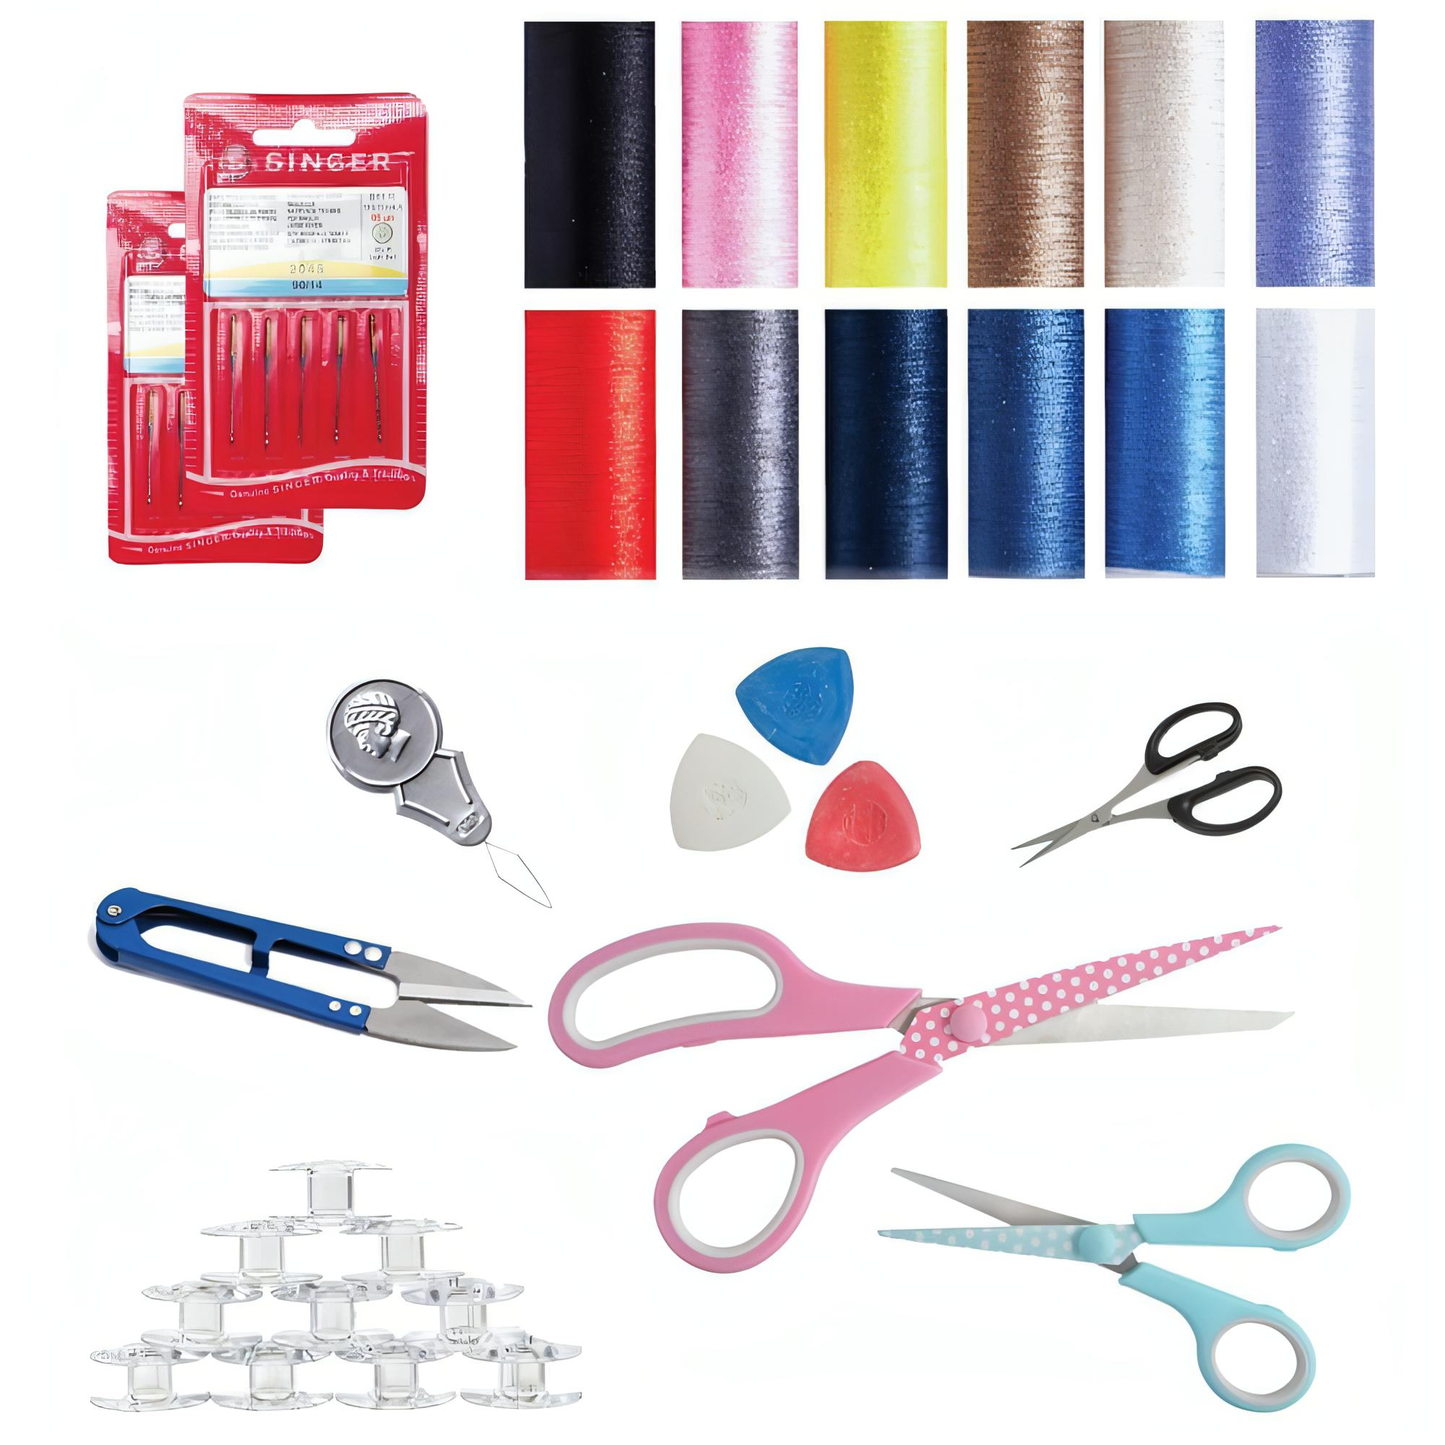 Sewing Sale Bundle Offer with 40 pieces - Thread Set, Scissor sets, Needle Pack, Bobbin Pack, Needle Threader, Thread cutter, Tailors chalk set